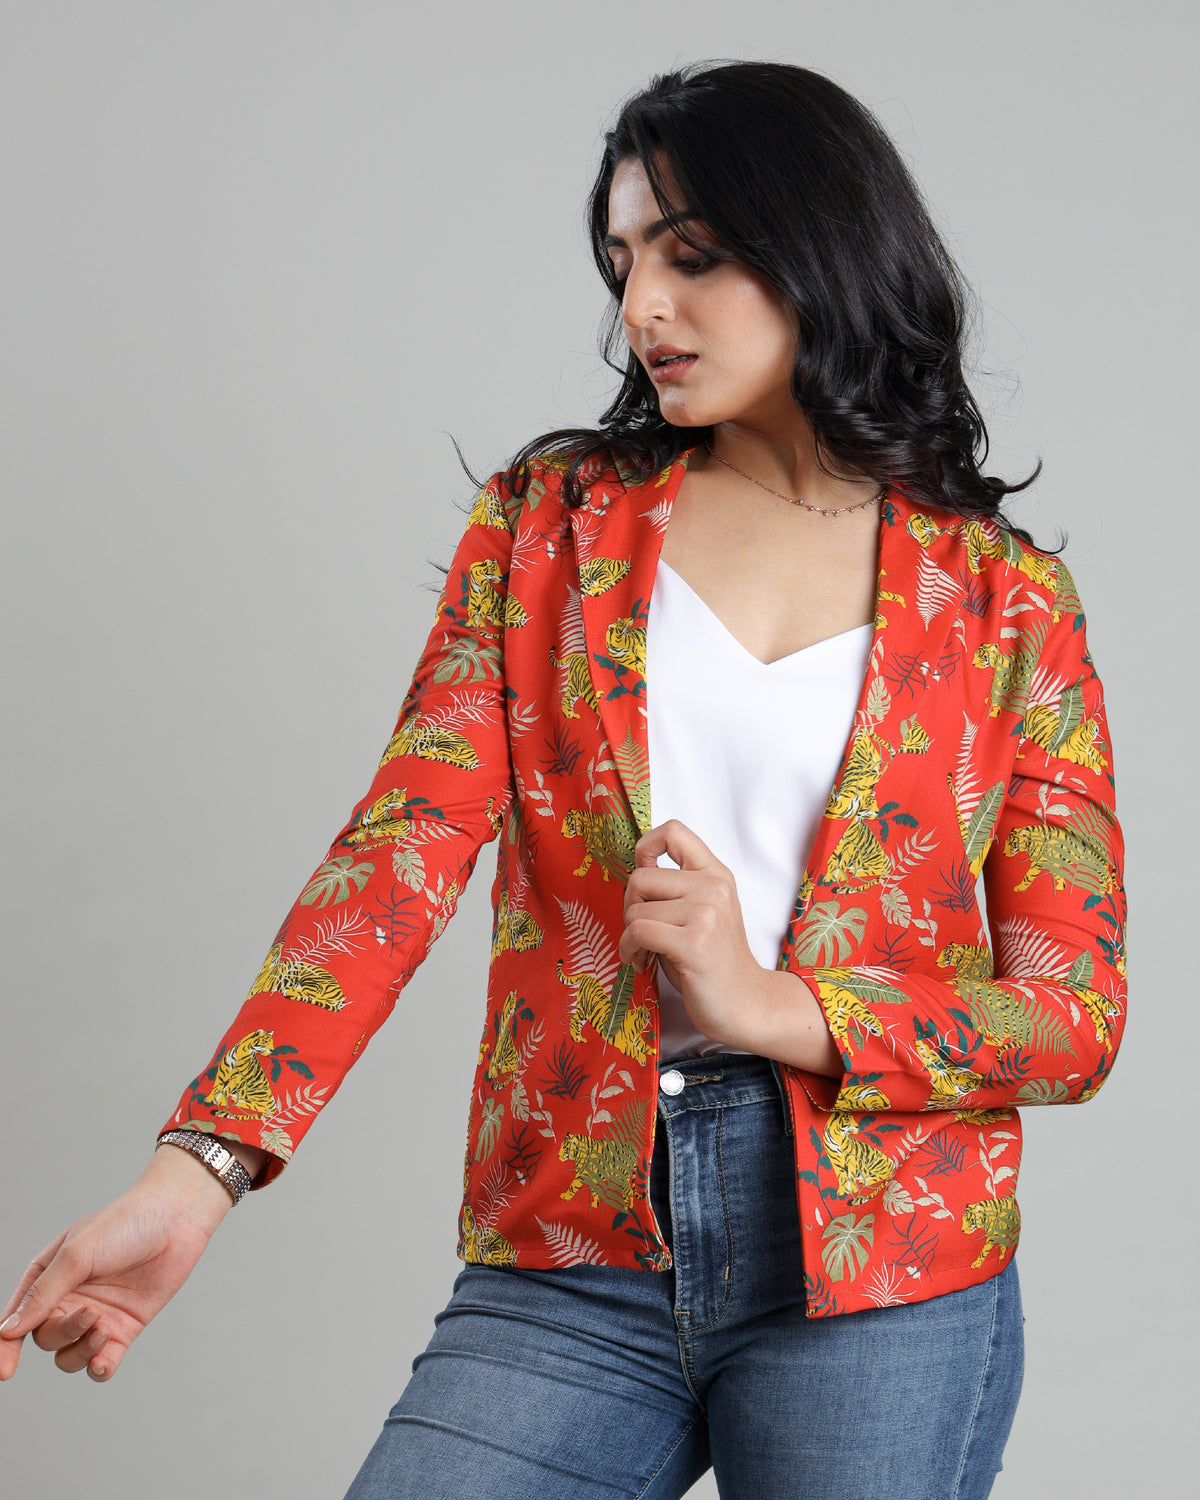 Embrace Timeless Beauty: Classic Jacket For Her